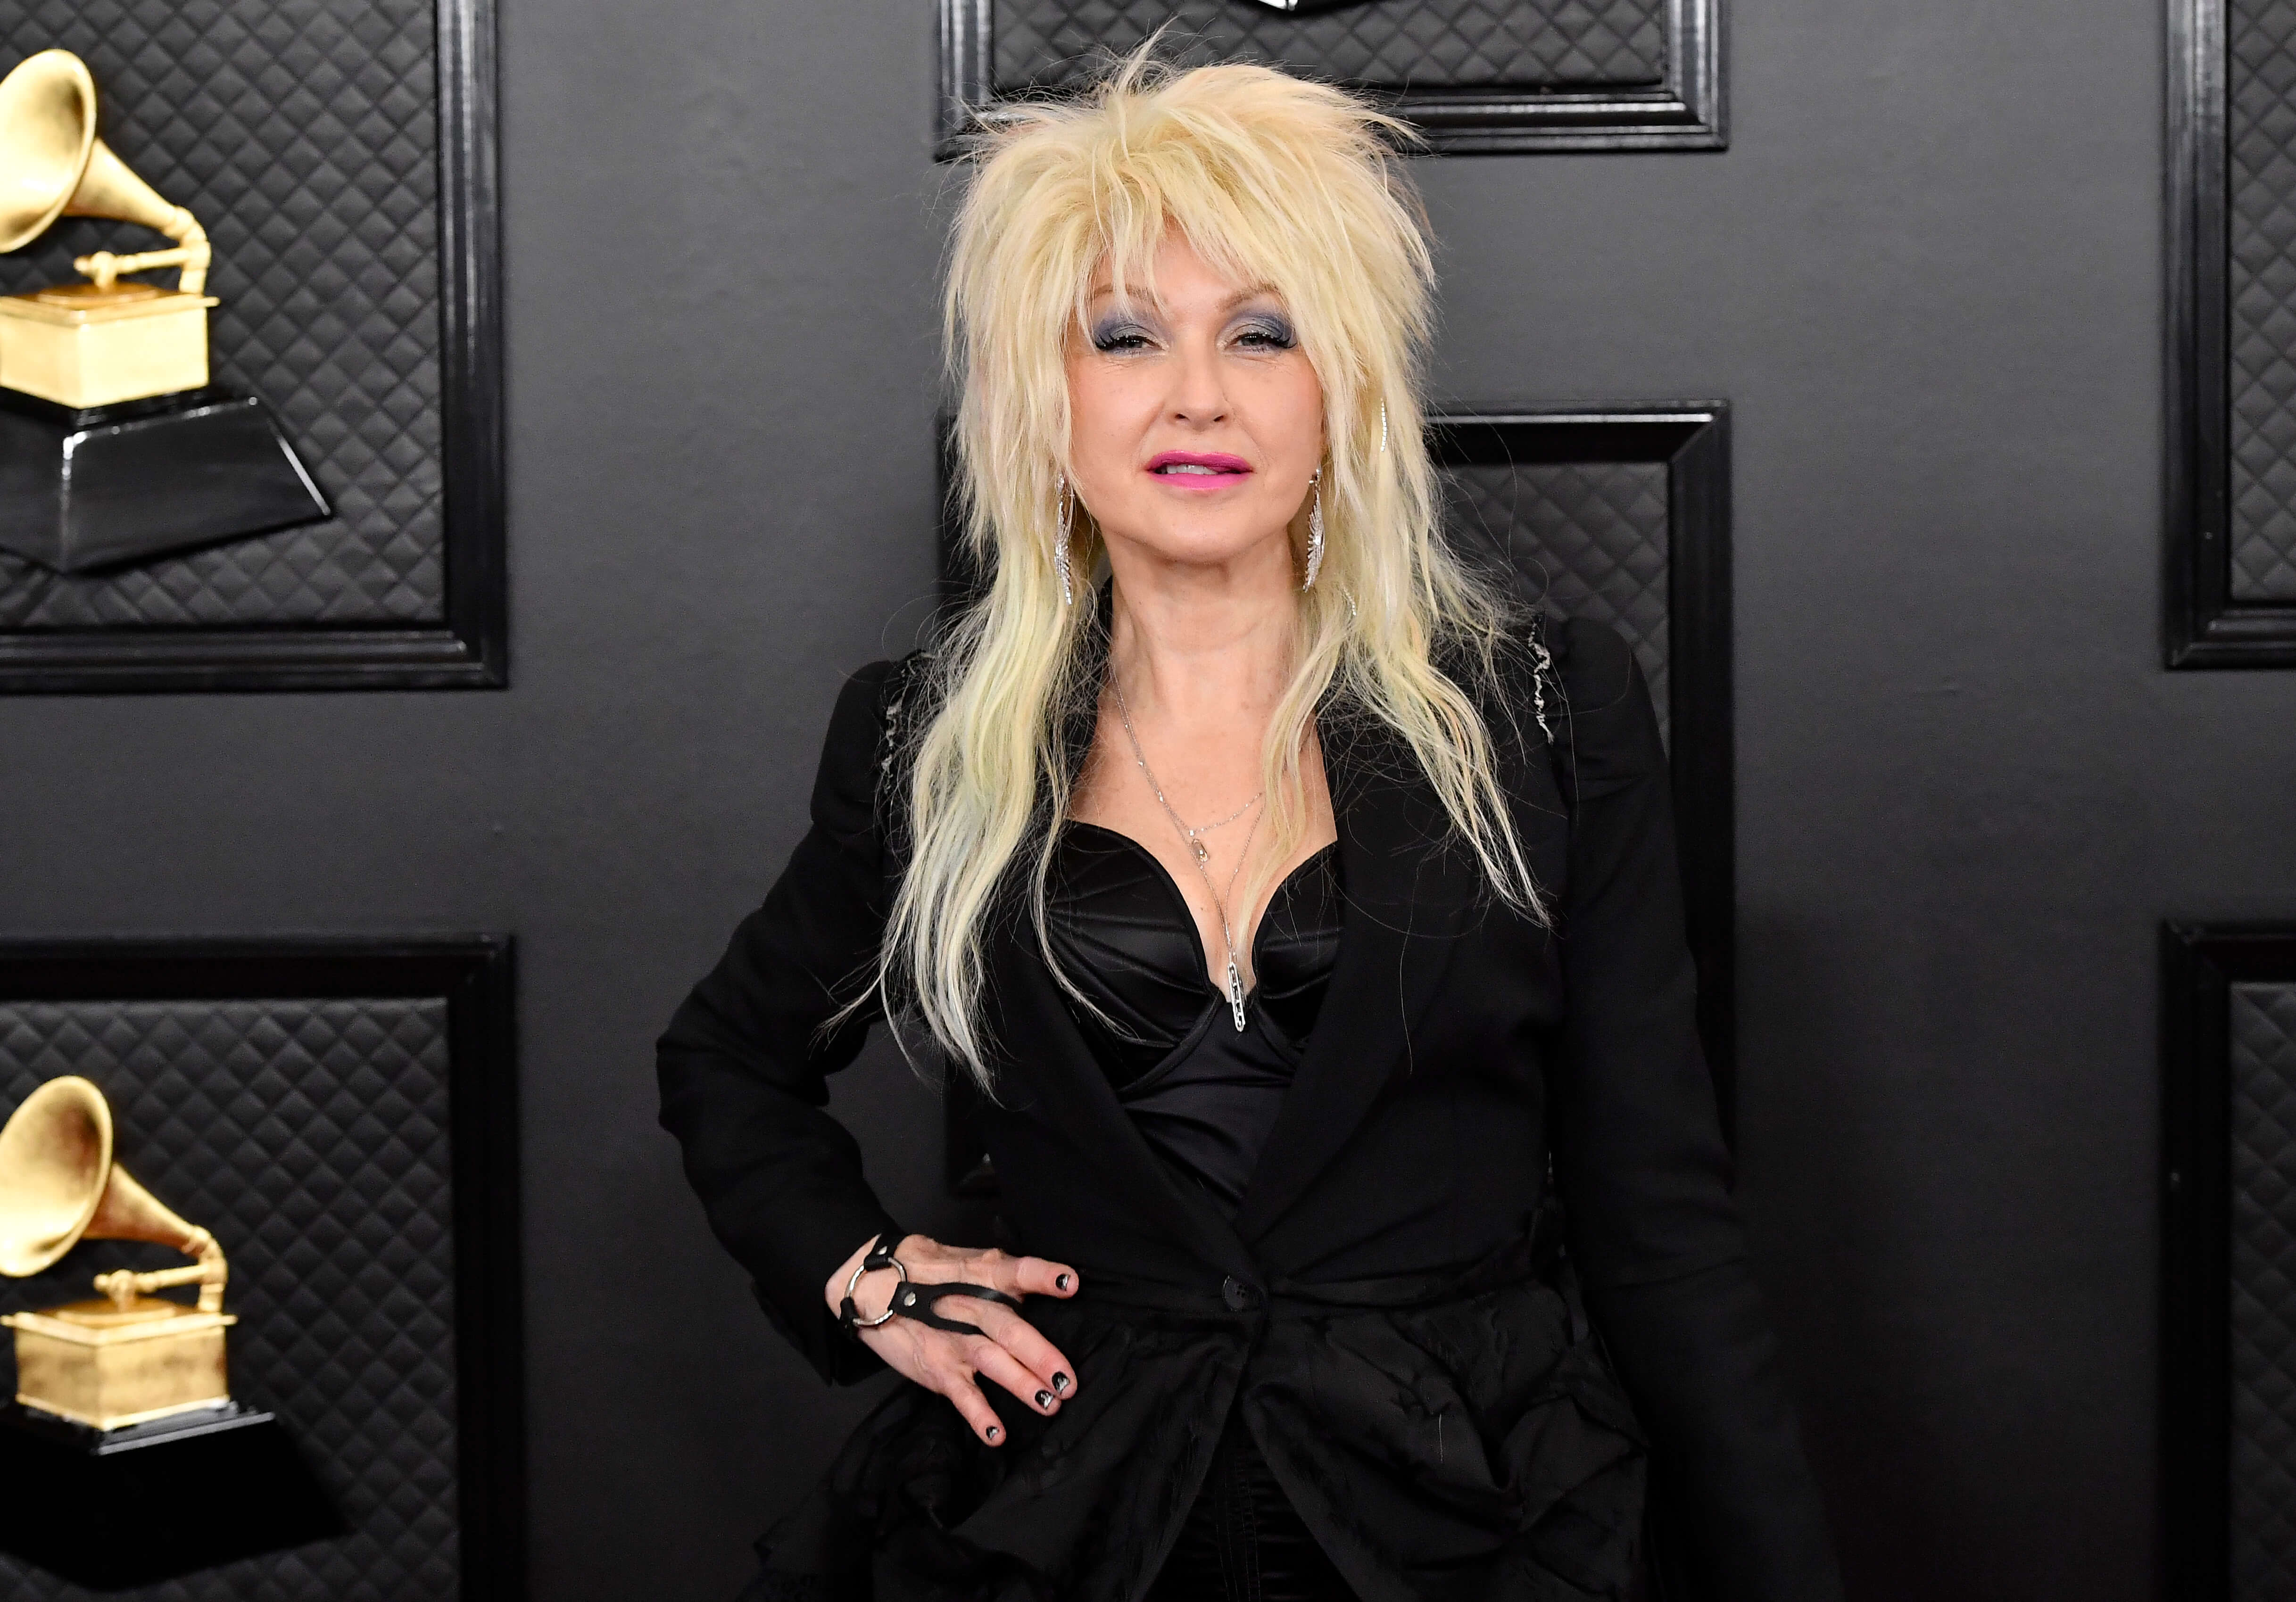 Cyndi Lauper poses with blonde hair and a black outfit.